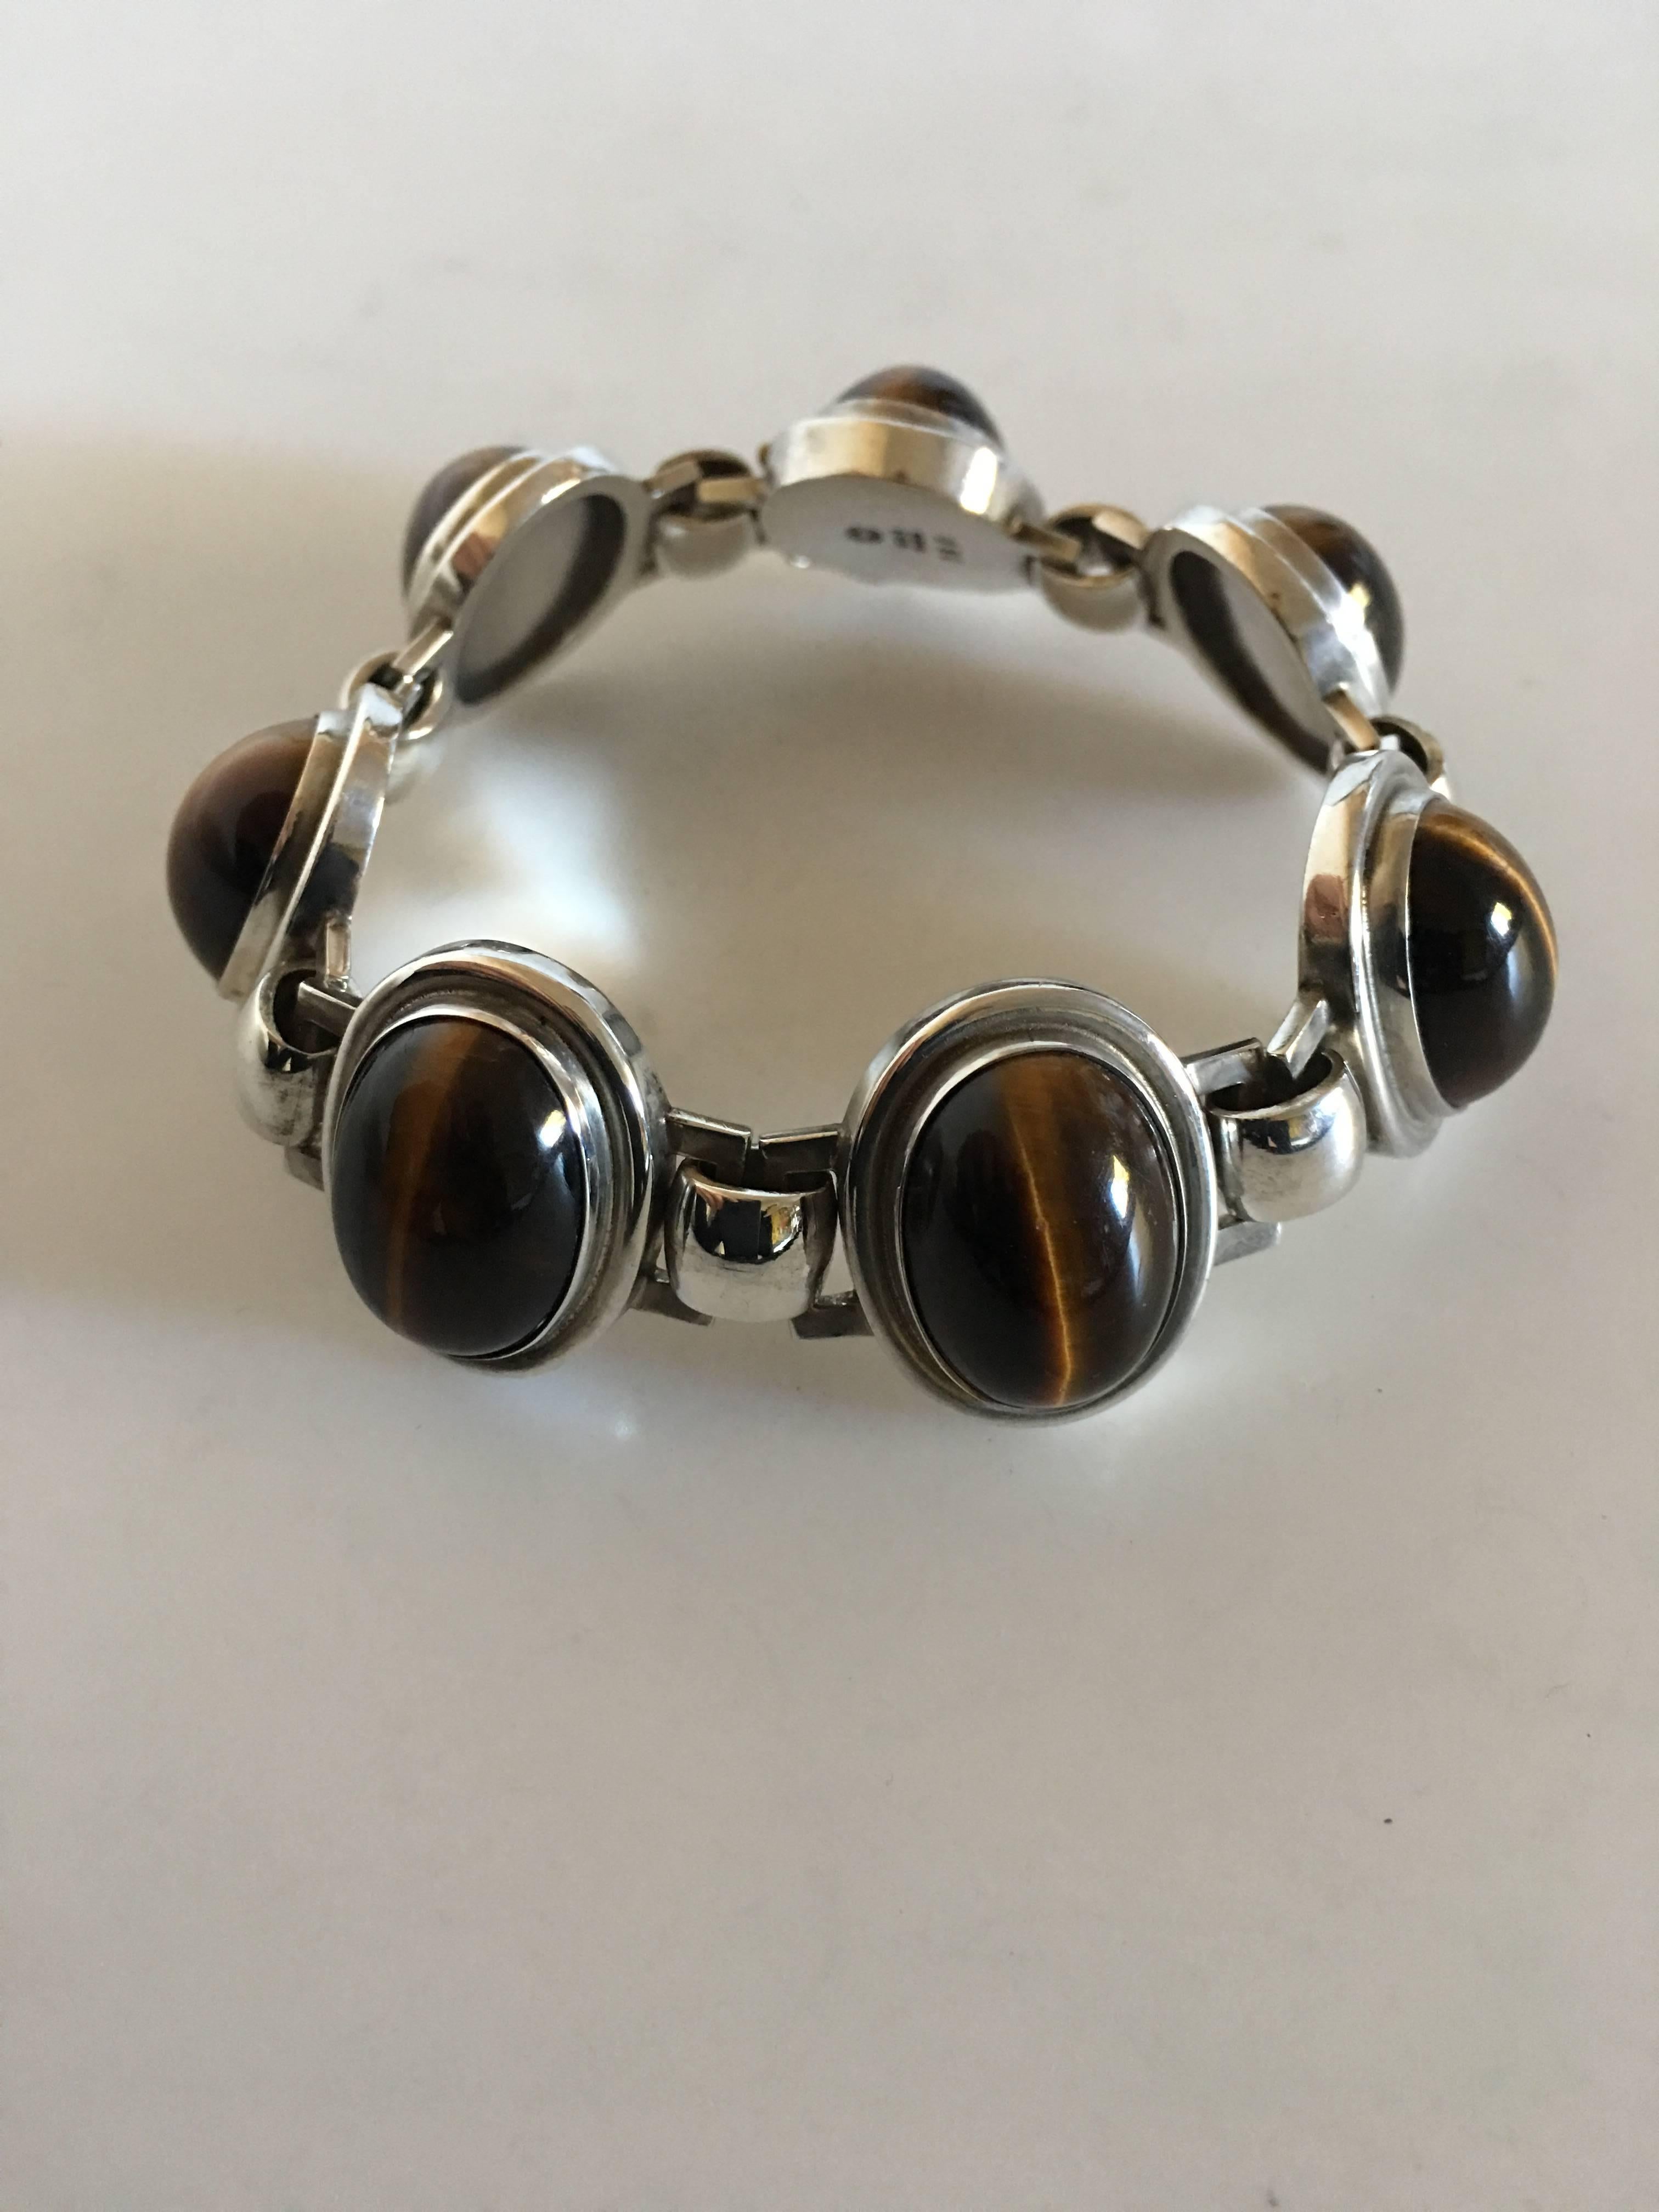 Georg Jensen Sterling Silver Bracelet No. 52A with Tiger's Eye Stones. 19 cm L. 2.3 cm Wide. Weighs 68 grams. From after 1945.